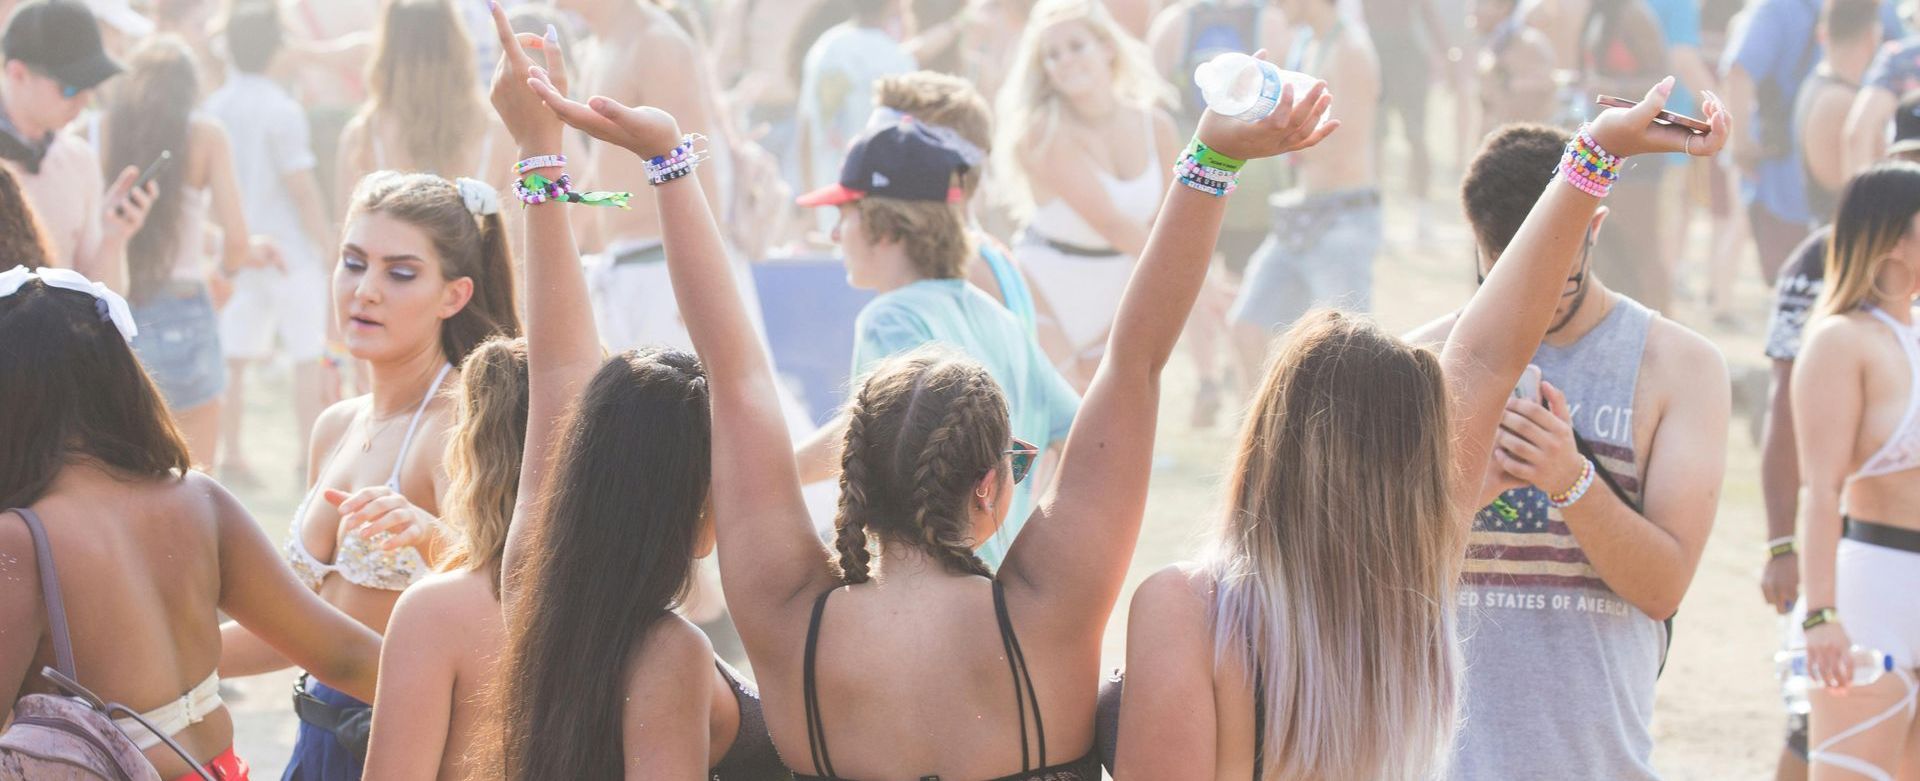 A group of girls at a festival with their backs to the camera. It's soft lighting and spring colours